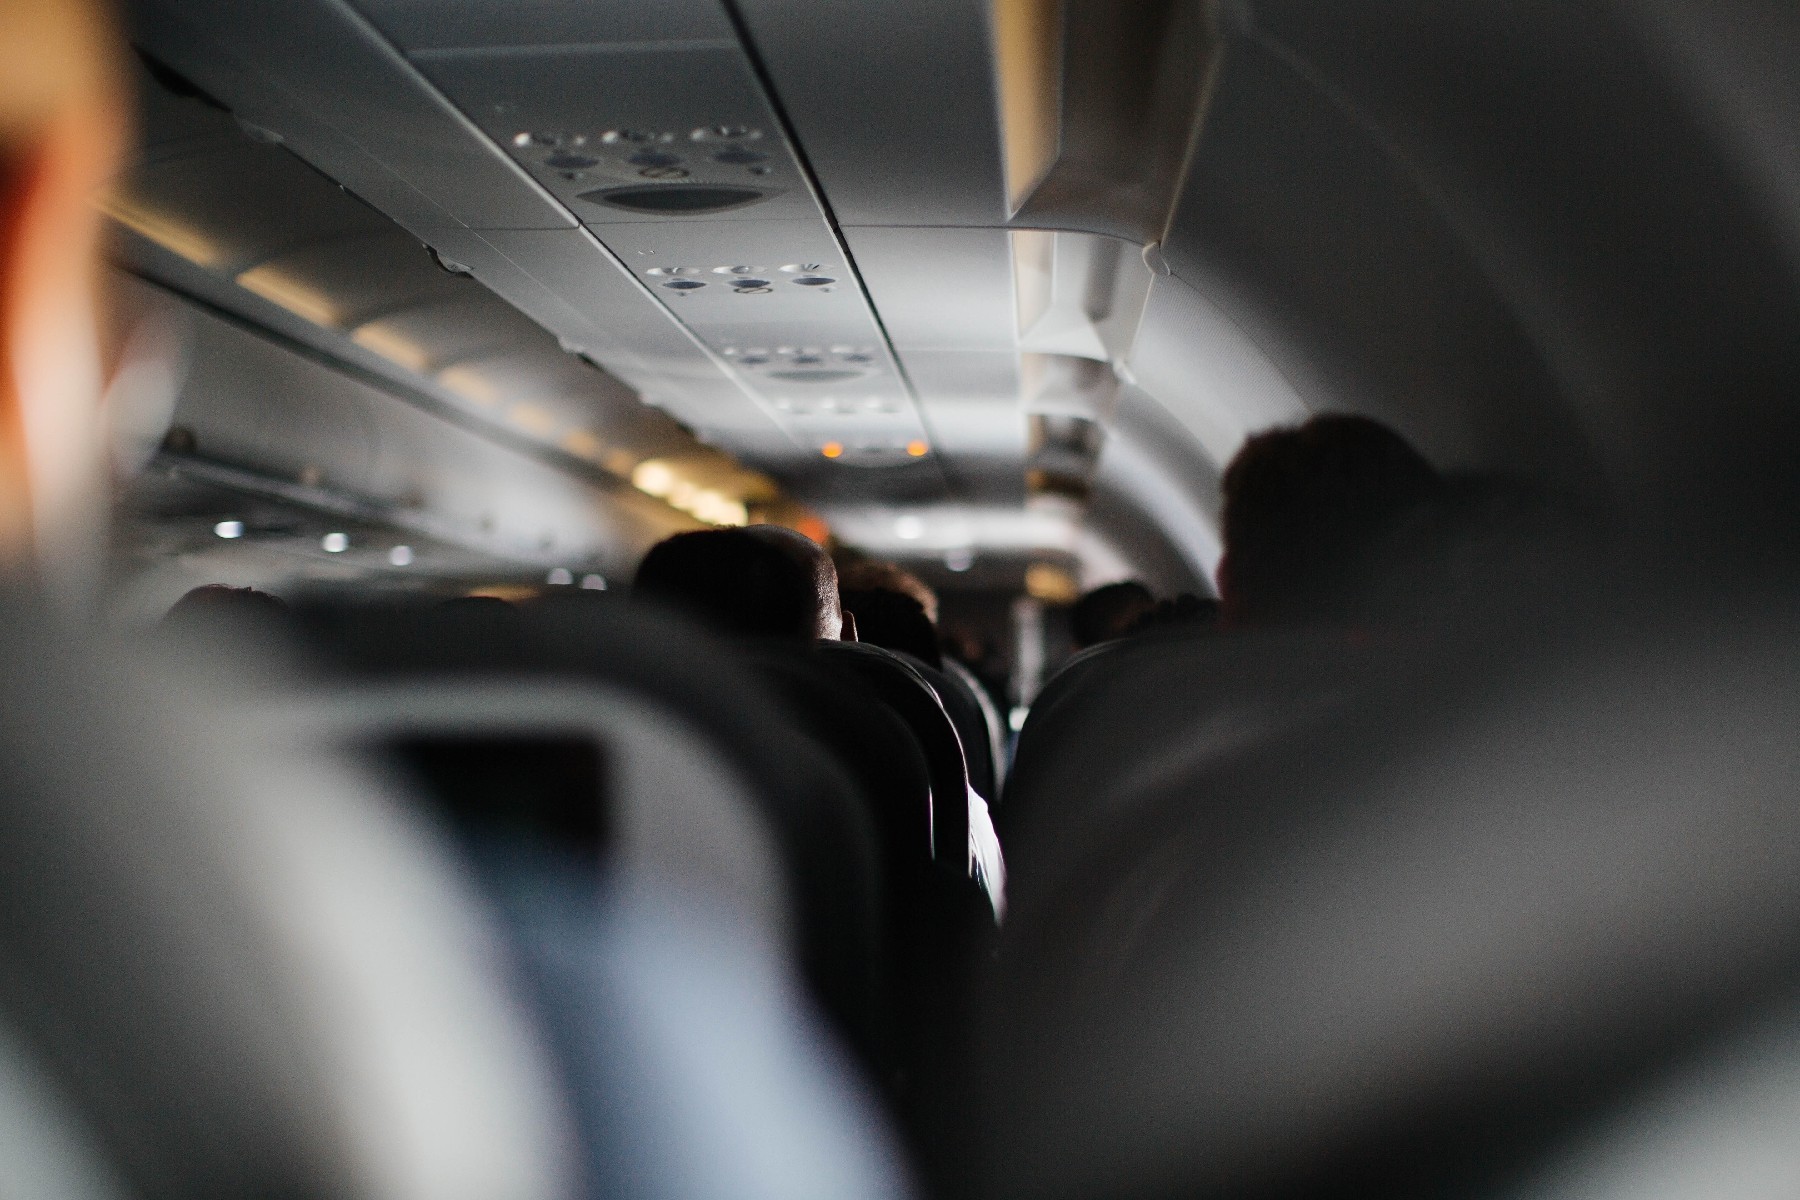 <p>Ever wonder why the cabin lights are <a href="https://www.littlethings.com/flight-attendant-secrets/" rel="noreferrer noopener">dimmed before a night landing</a>? It’s to allow your vision time to adjust in case the plane needs to be evacuated upon landing. This ensures you don’t wind up stumbling around in the dark and causing delays during an emergency.</p>